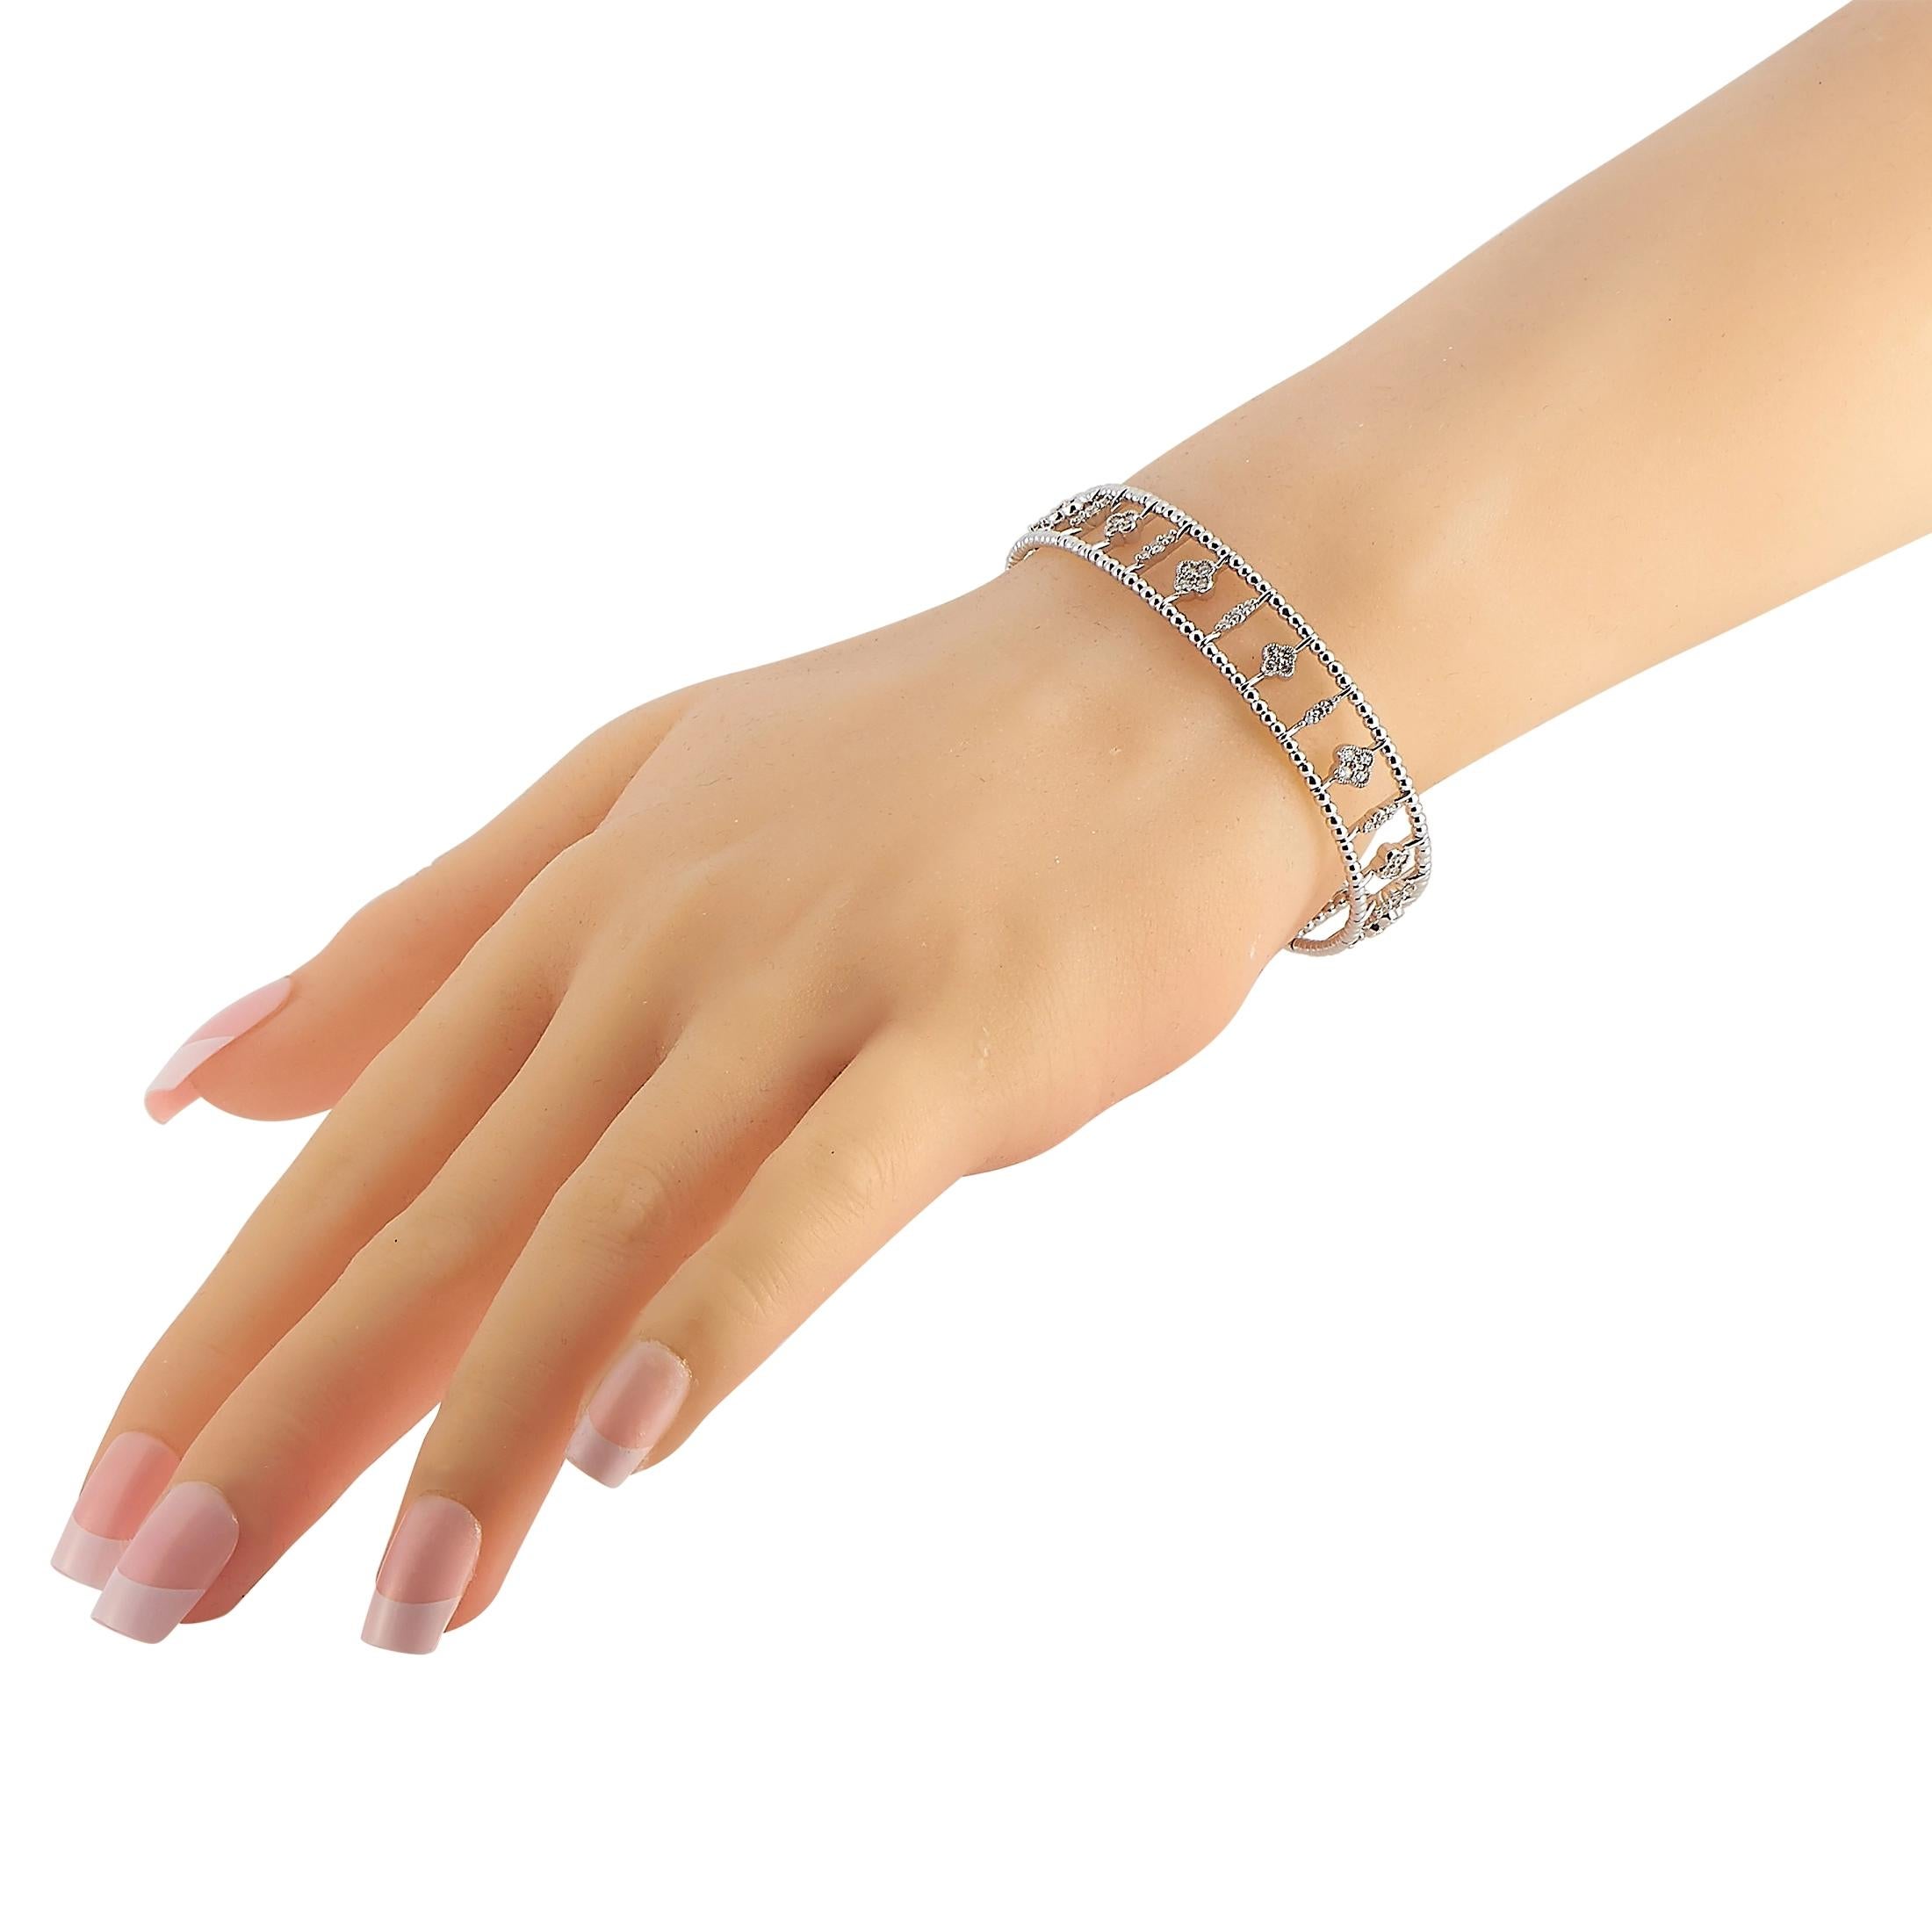 Add an instant chic factor to your most basic outfits with the LB Exclusive Dainty Flower 14K White Gold 1.22 ct Diamond Bangle. This cool white gold bangle features a lovely row of alternating floral-themed columns held in between two delicately